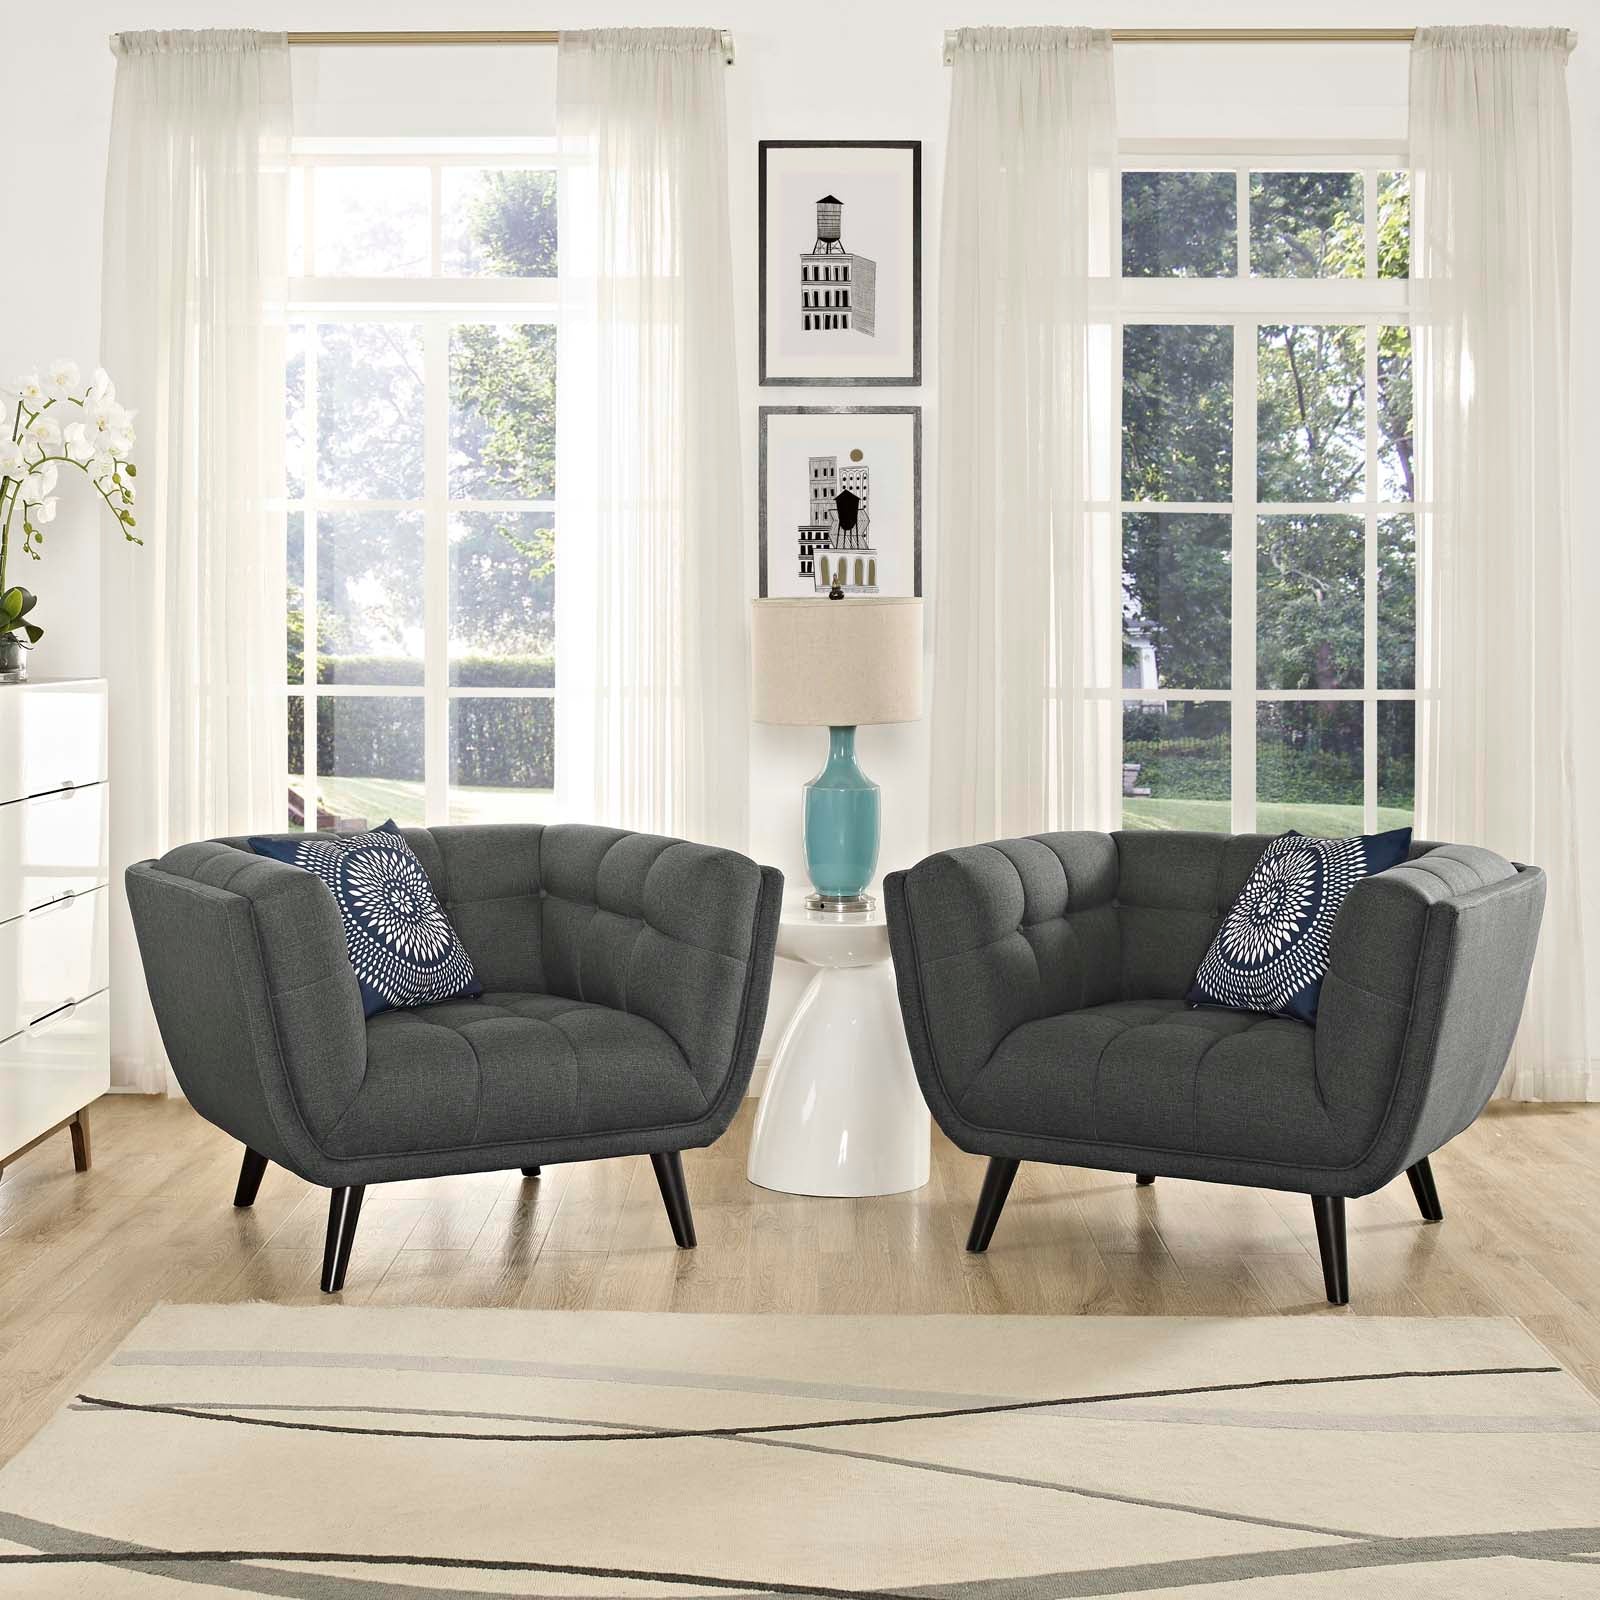 Modway Living Room Sets - Bestow 2 Piece Upholstered Fabric Armchair Set Gray